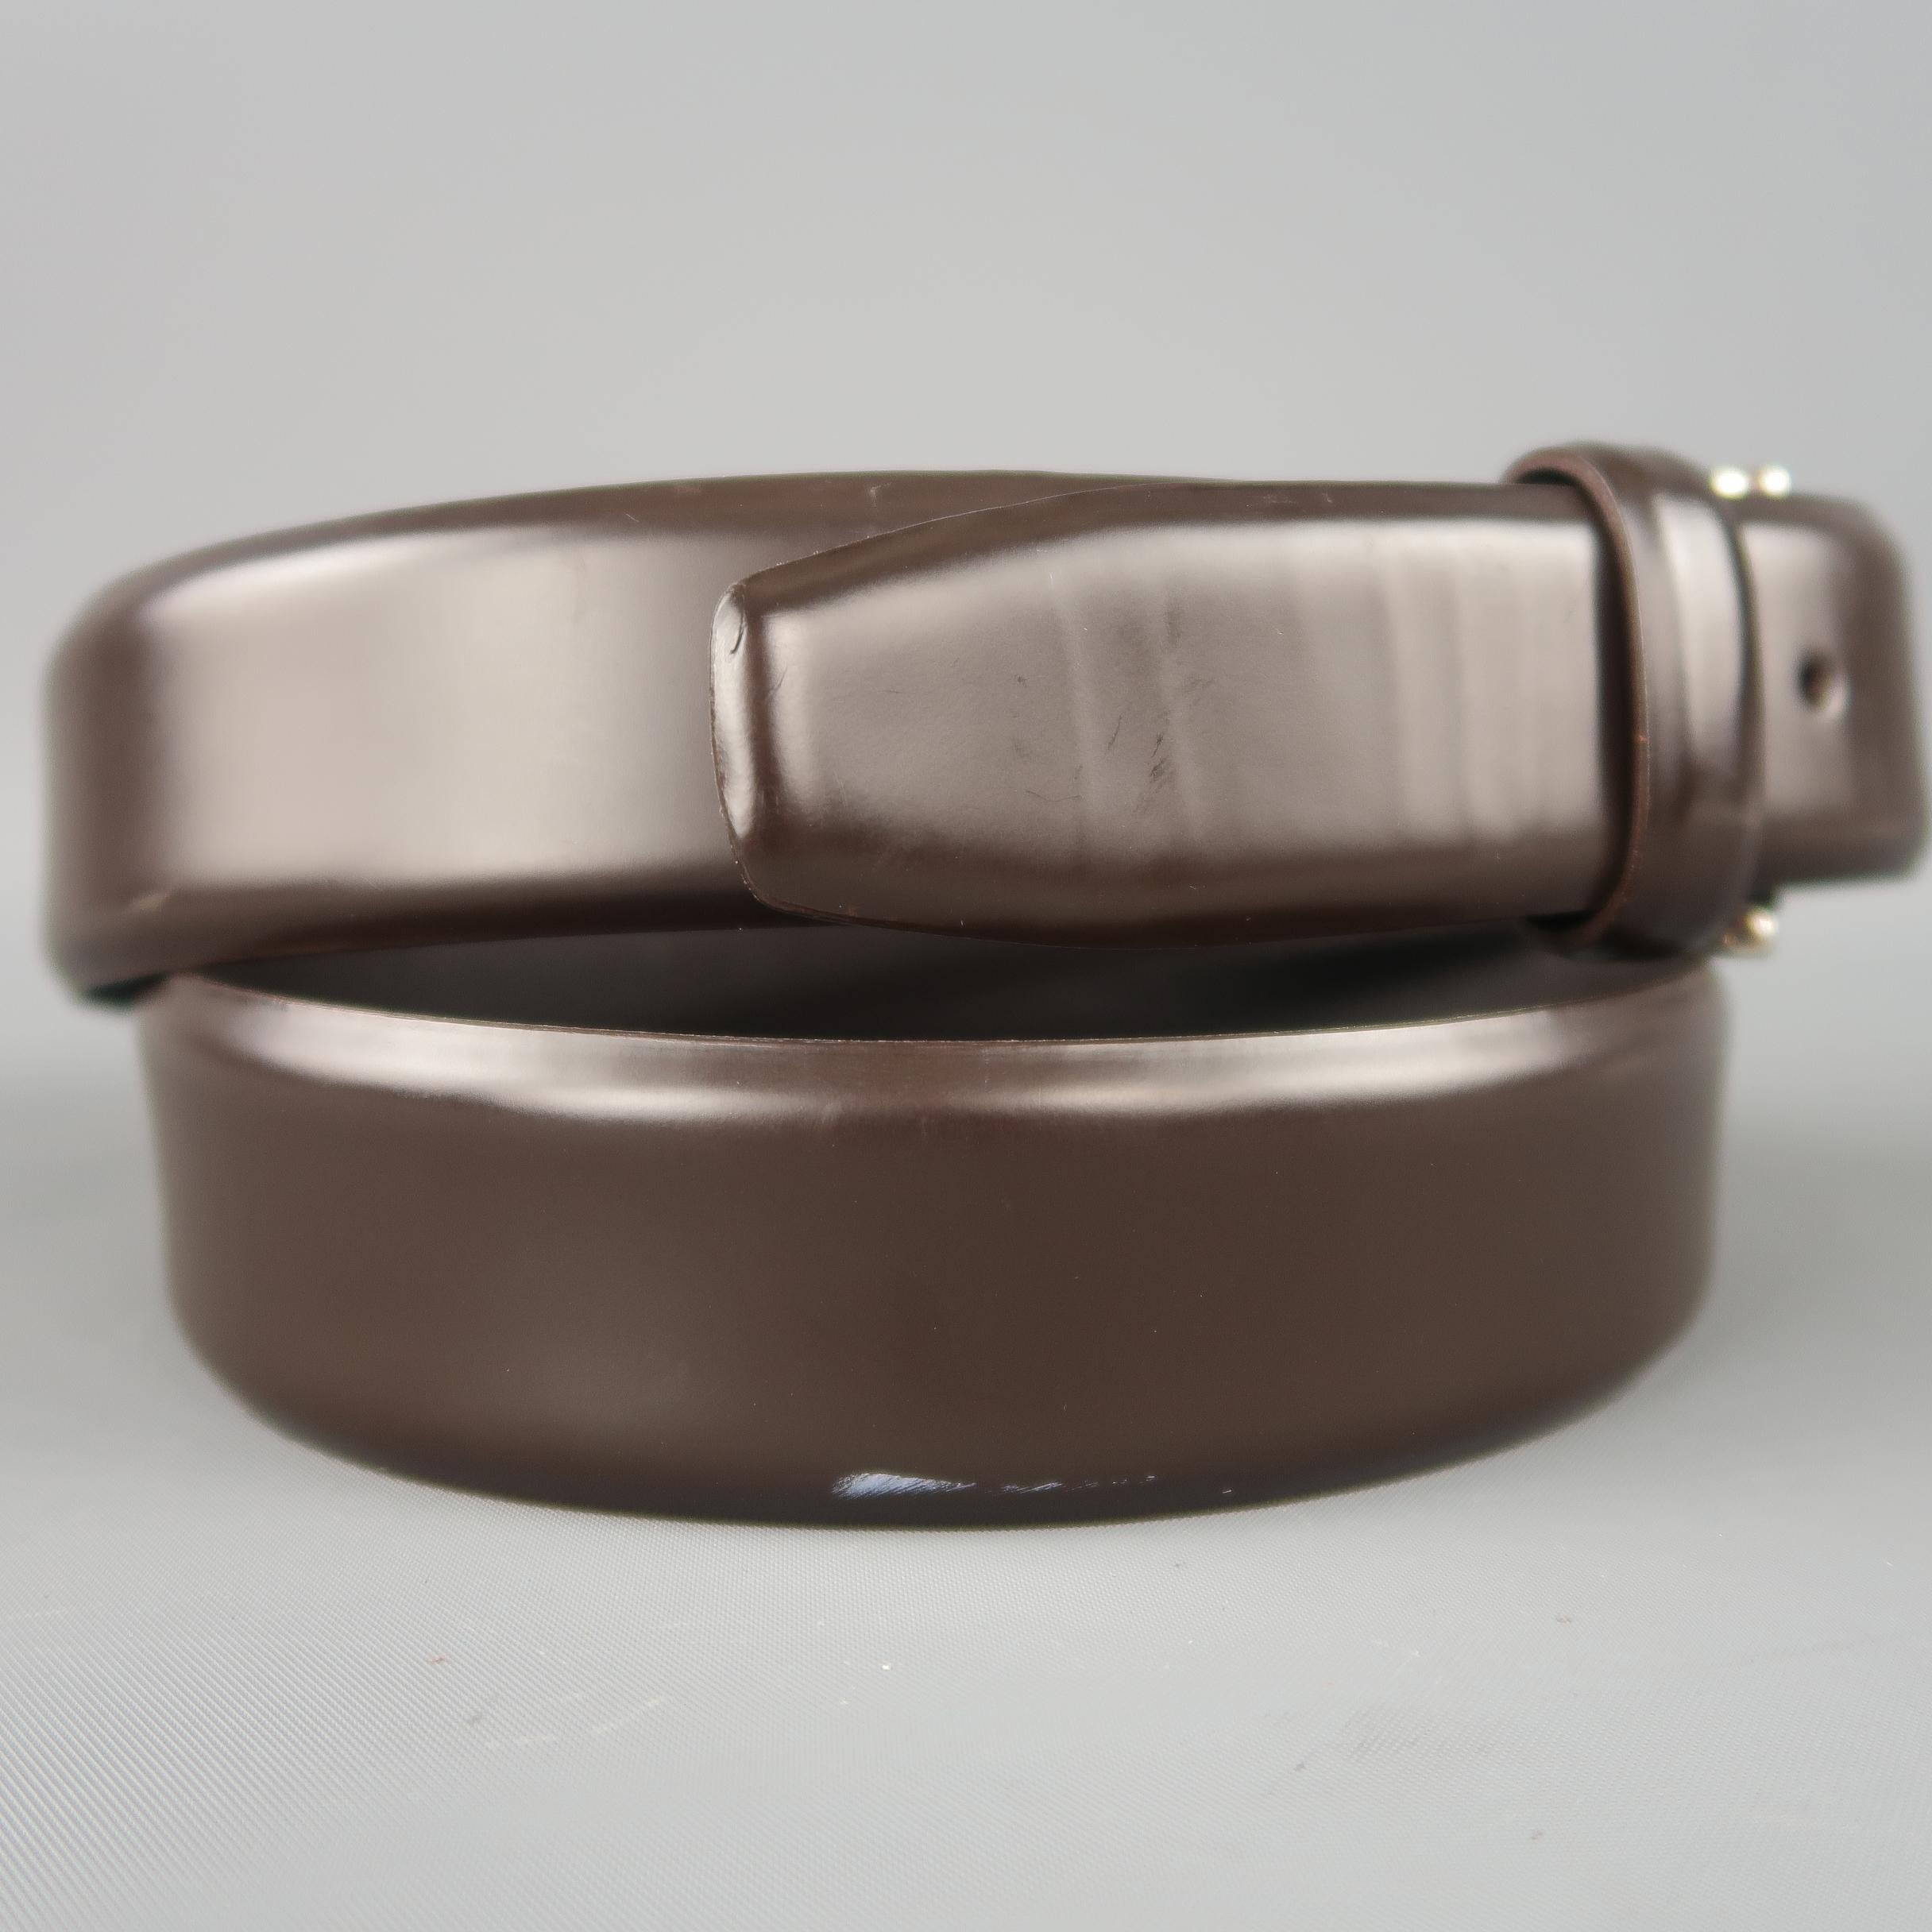 ERMENEGILDO ZEGNA dress belt features a smooth dark brown leather strap with a silver tone brass buckle. Wear.  Made in Italy.
 
Good Pre-Owned Condition.
Marked: 110 / 95
 
Length: 44 in.
Width: 1.25 in.
Fits: 36-40 in.